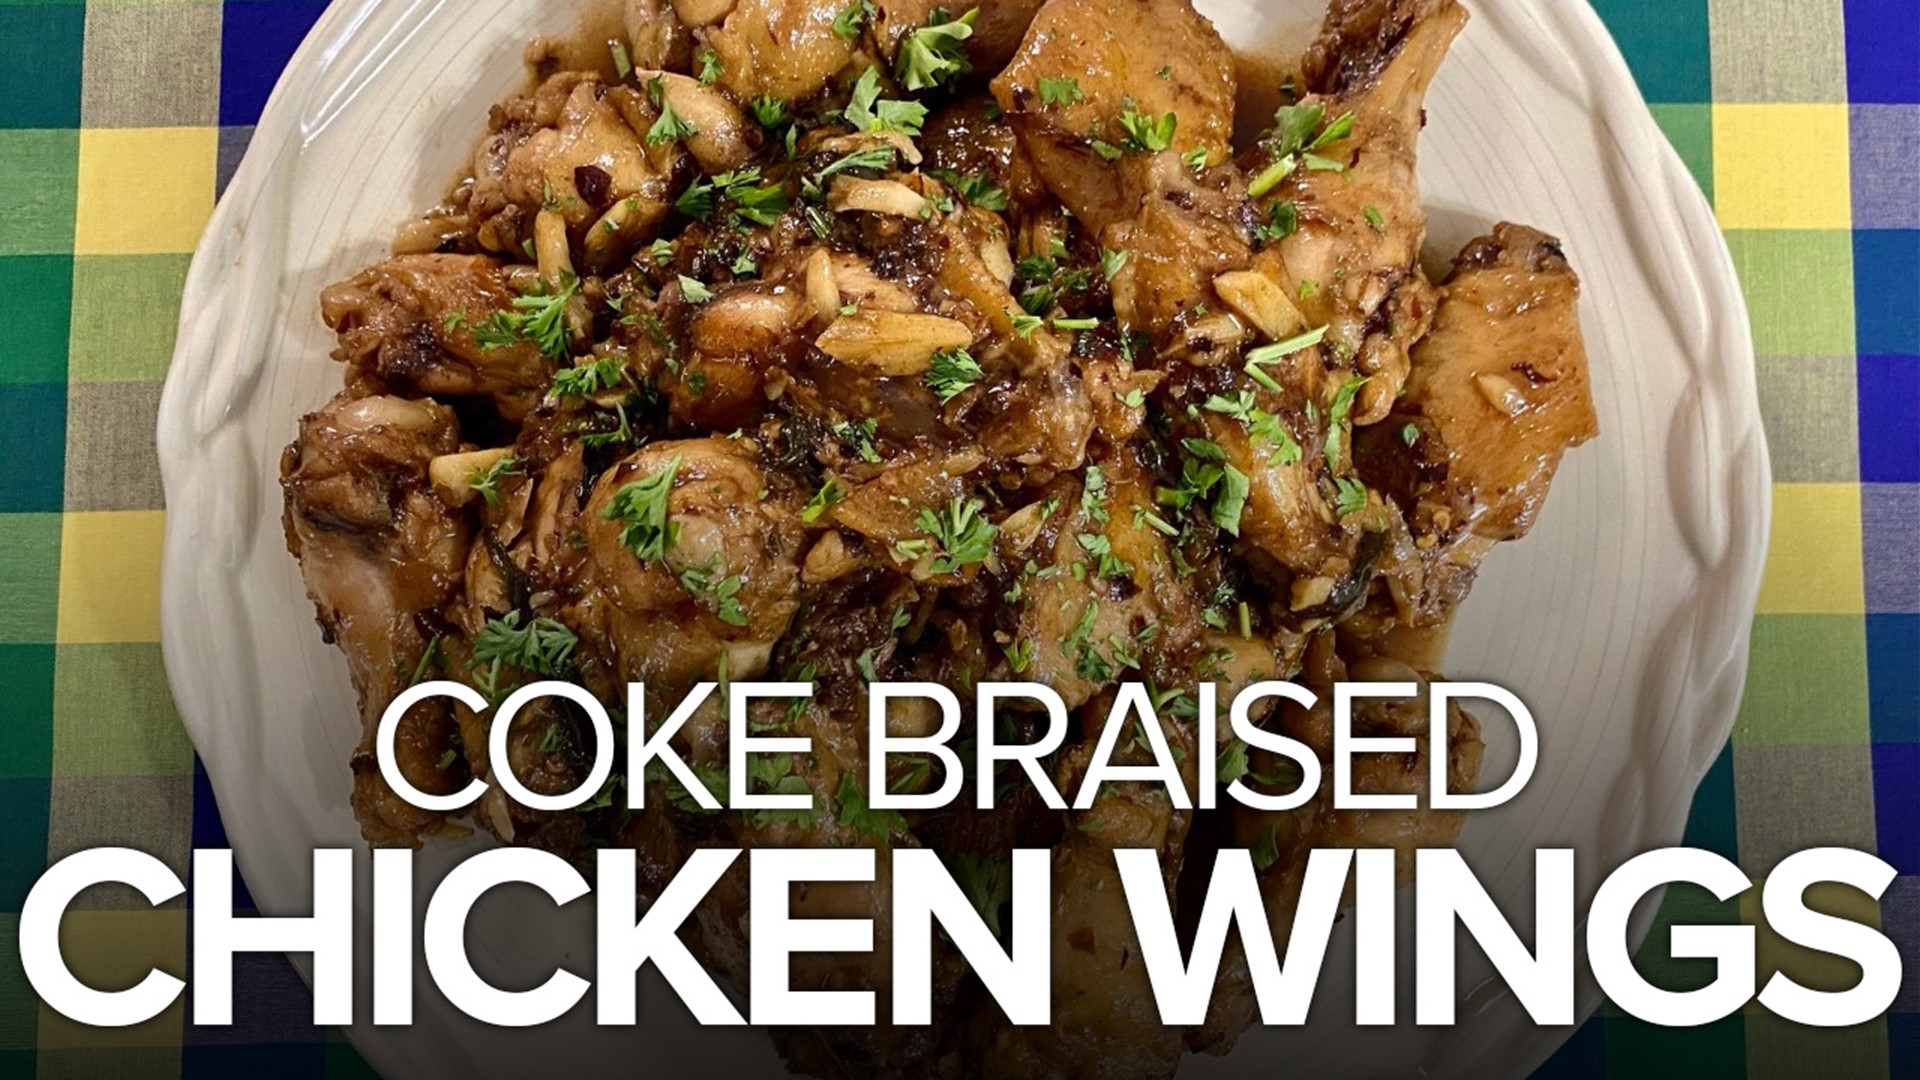 May 8 is 'Have a Coke Day,' so let's take it a step further with these Coca-Cola braised chicken wings!